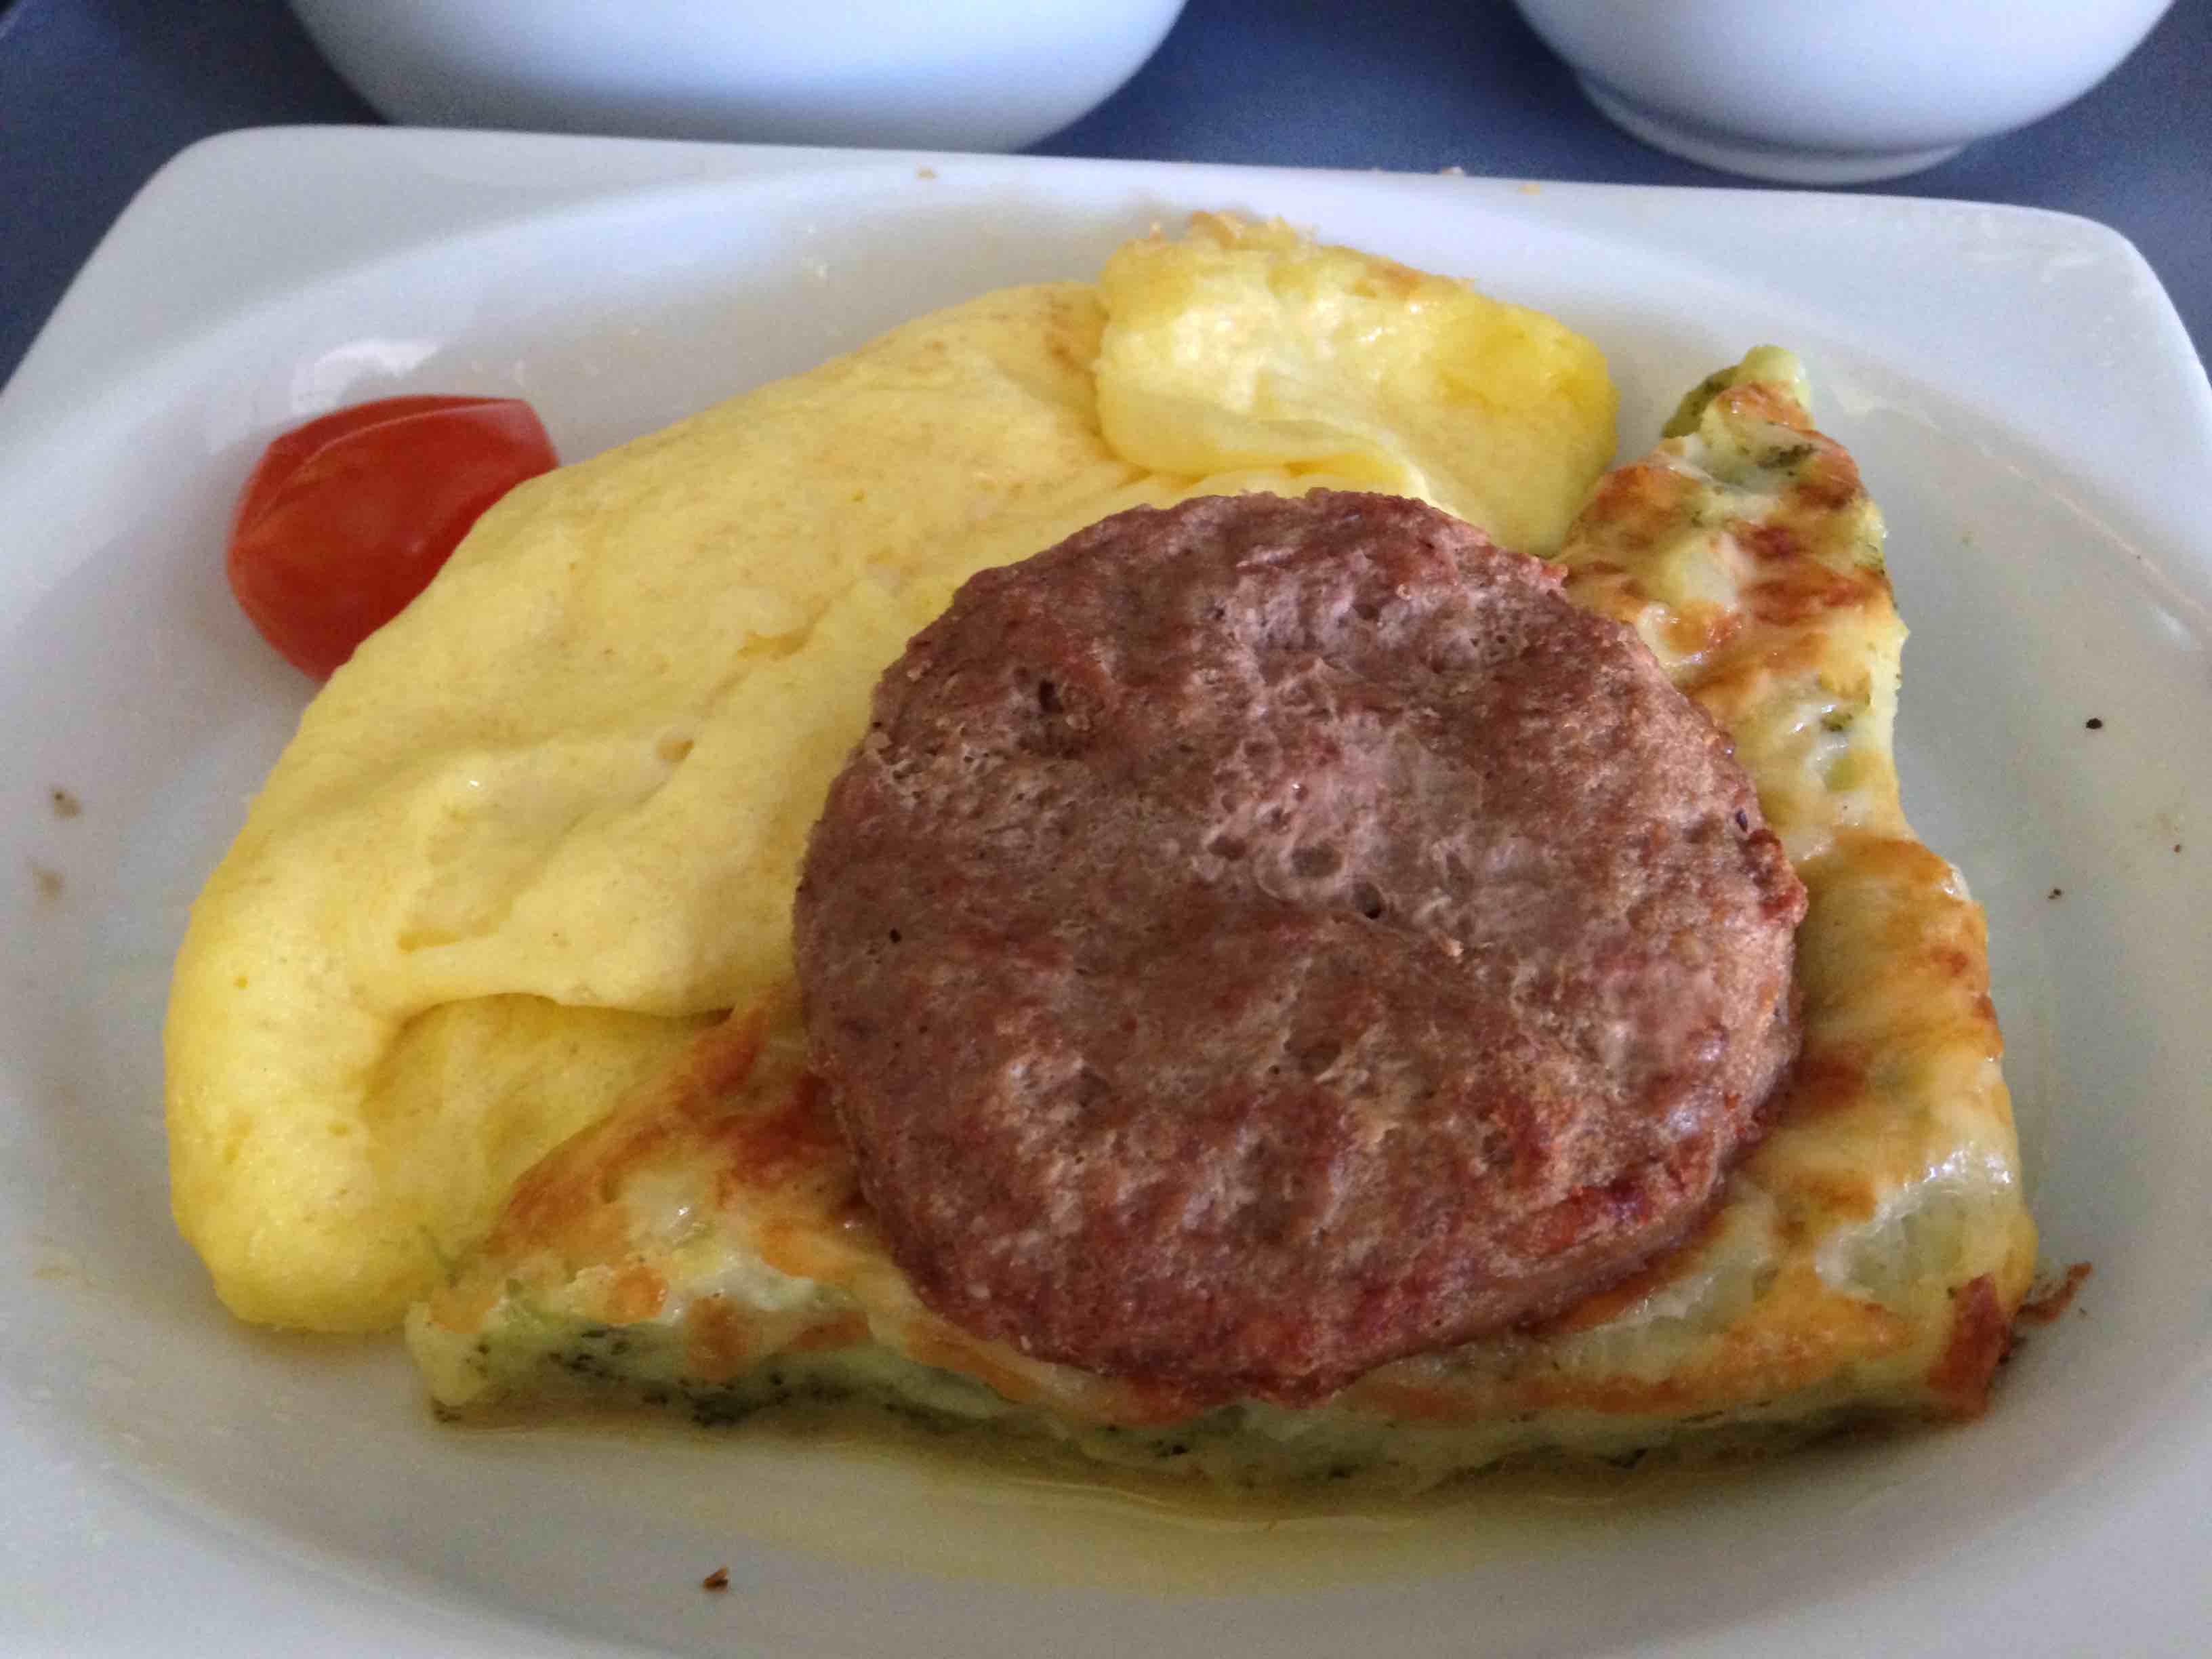 a plate of food with a hamburger and omelette